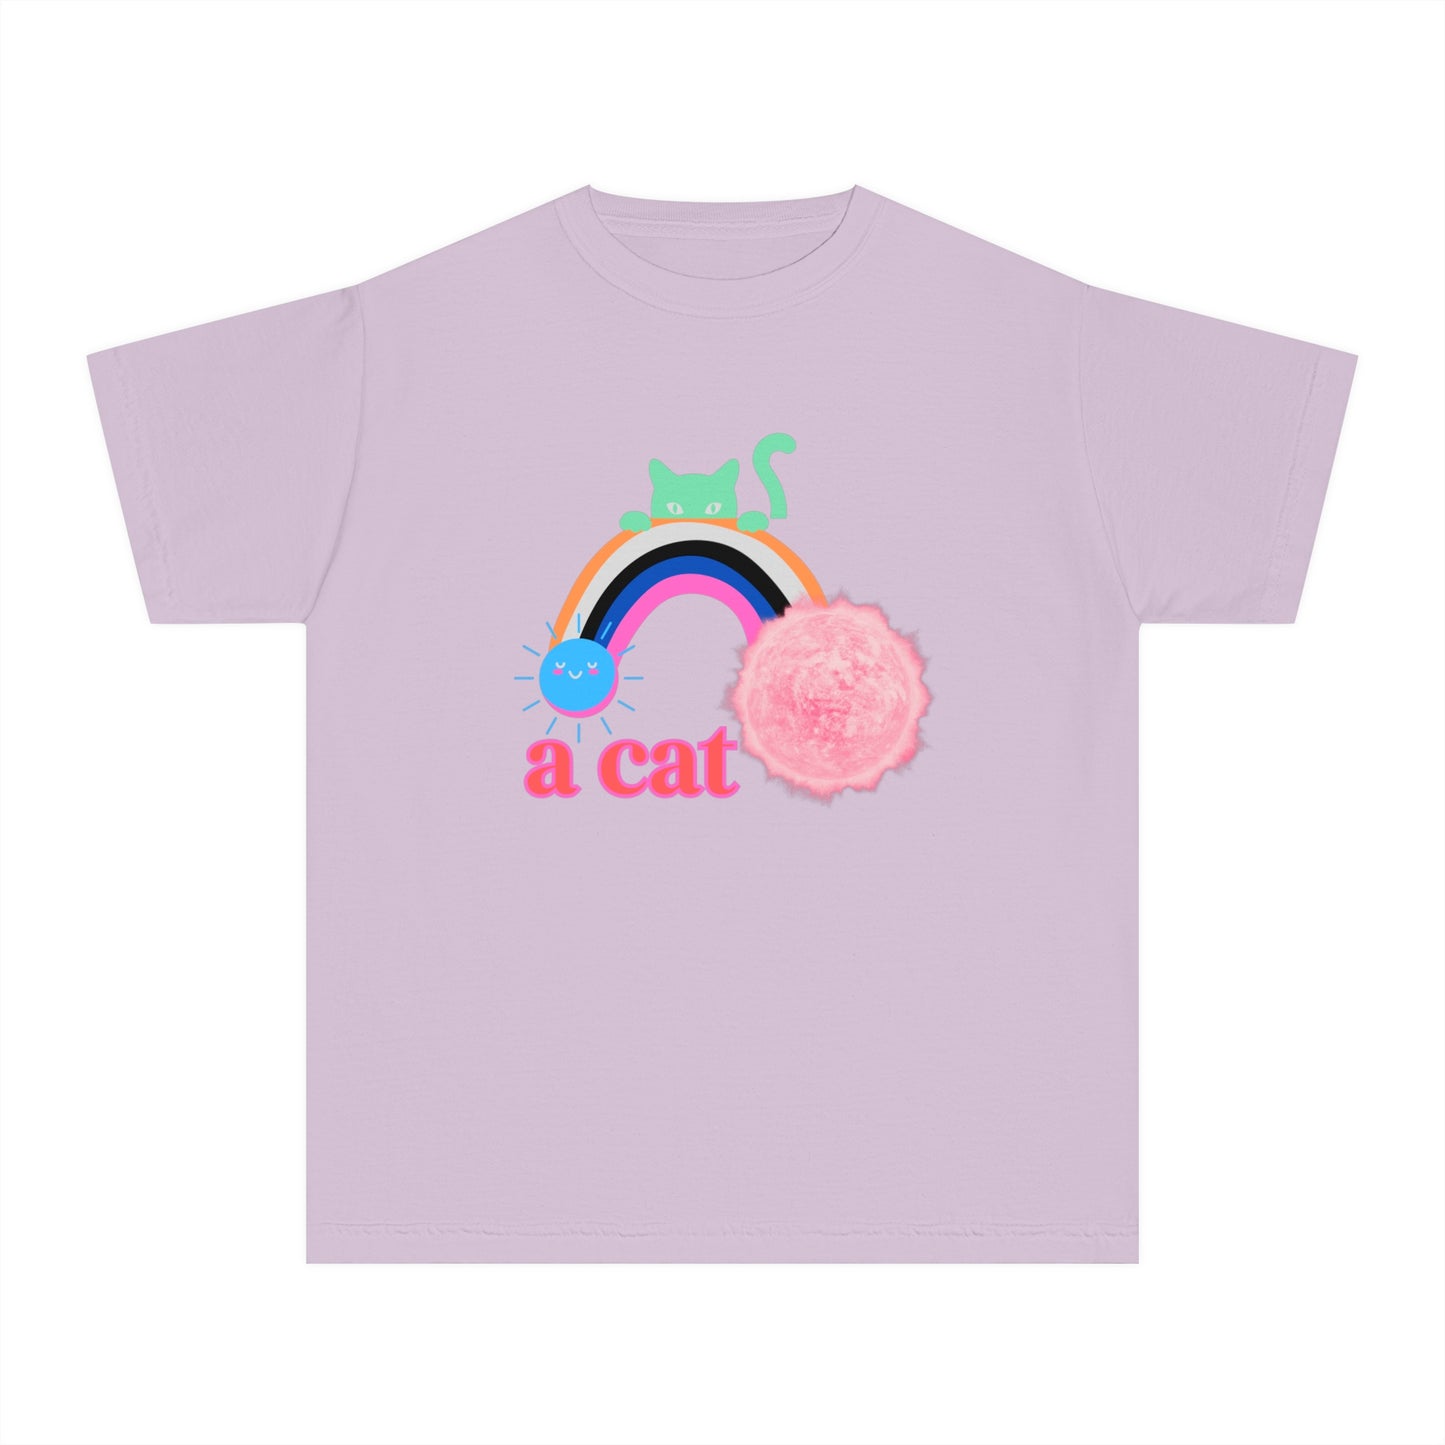 My 4-Year-Old Designed This Shirt - Kids Size